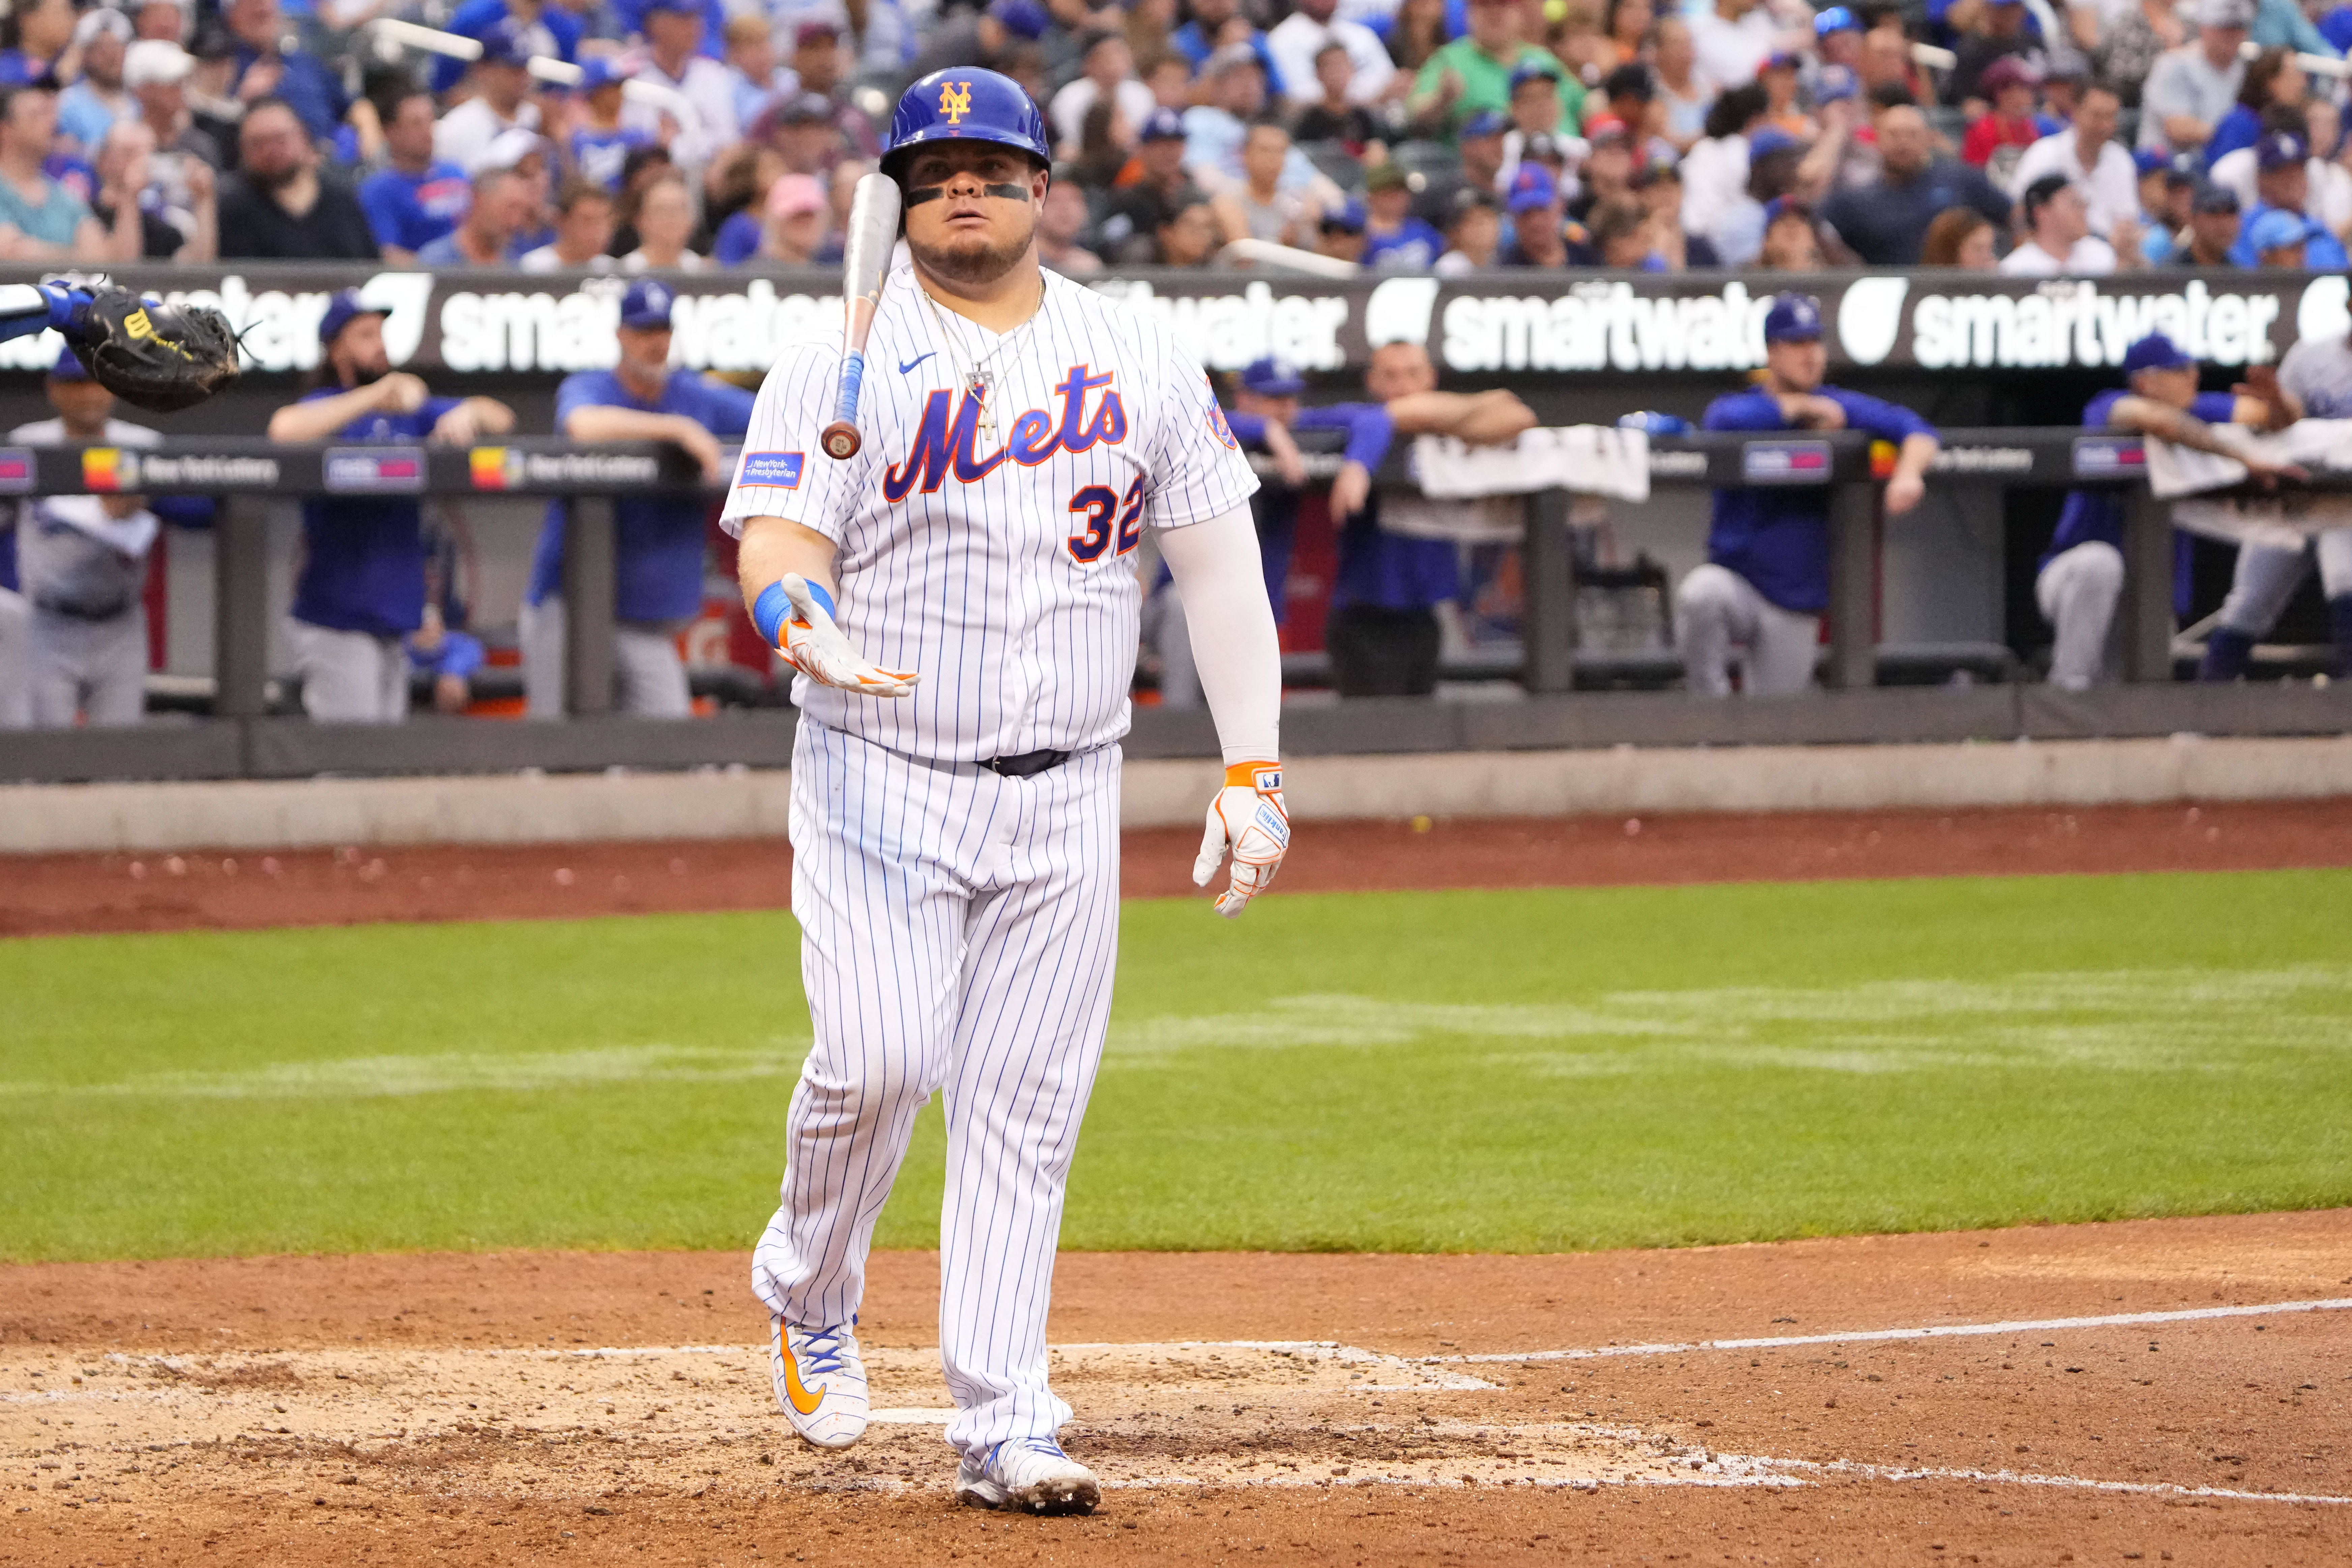 Luis Guillorme's walk-off hit ends Mets' skid in win over Dodgers